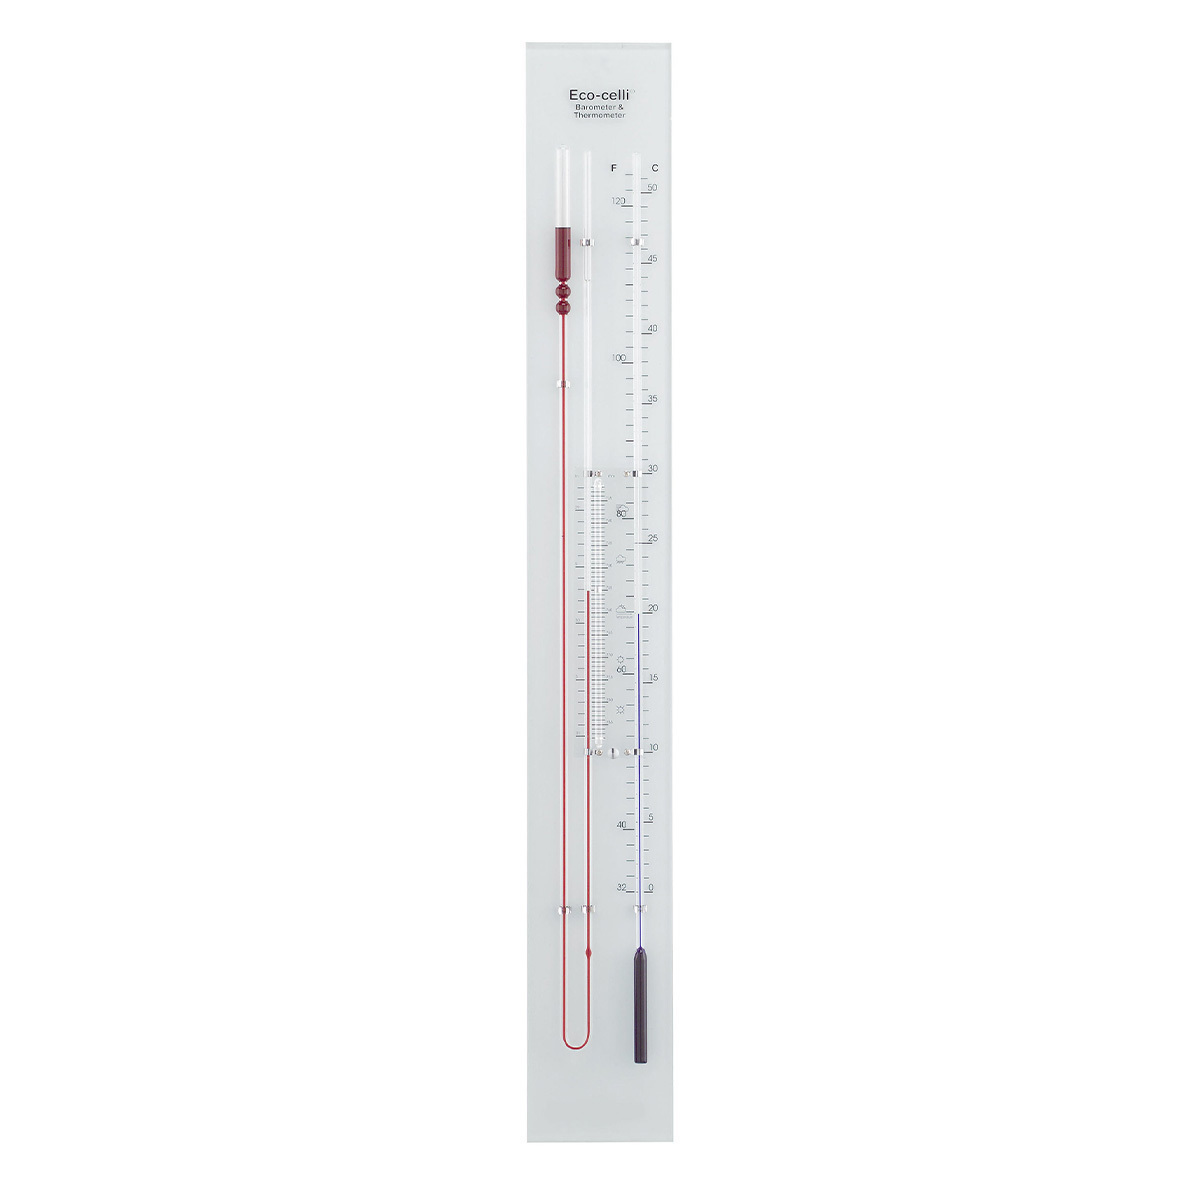 29-1007-fluid-barometer-thermometer-ecocelli-1200x1200px.jpg